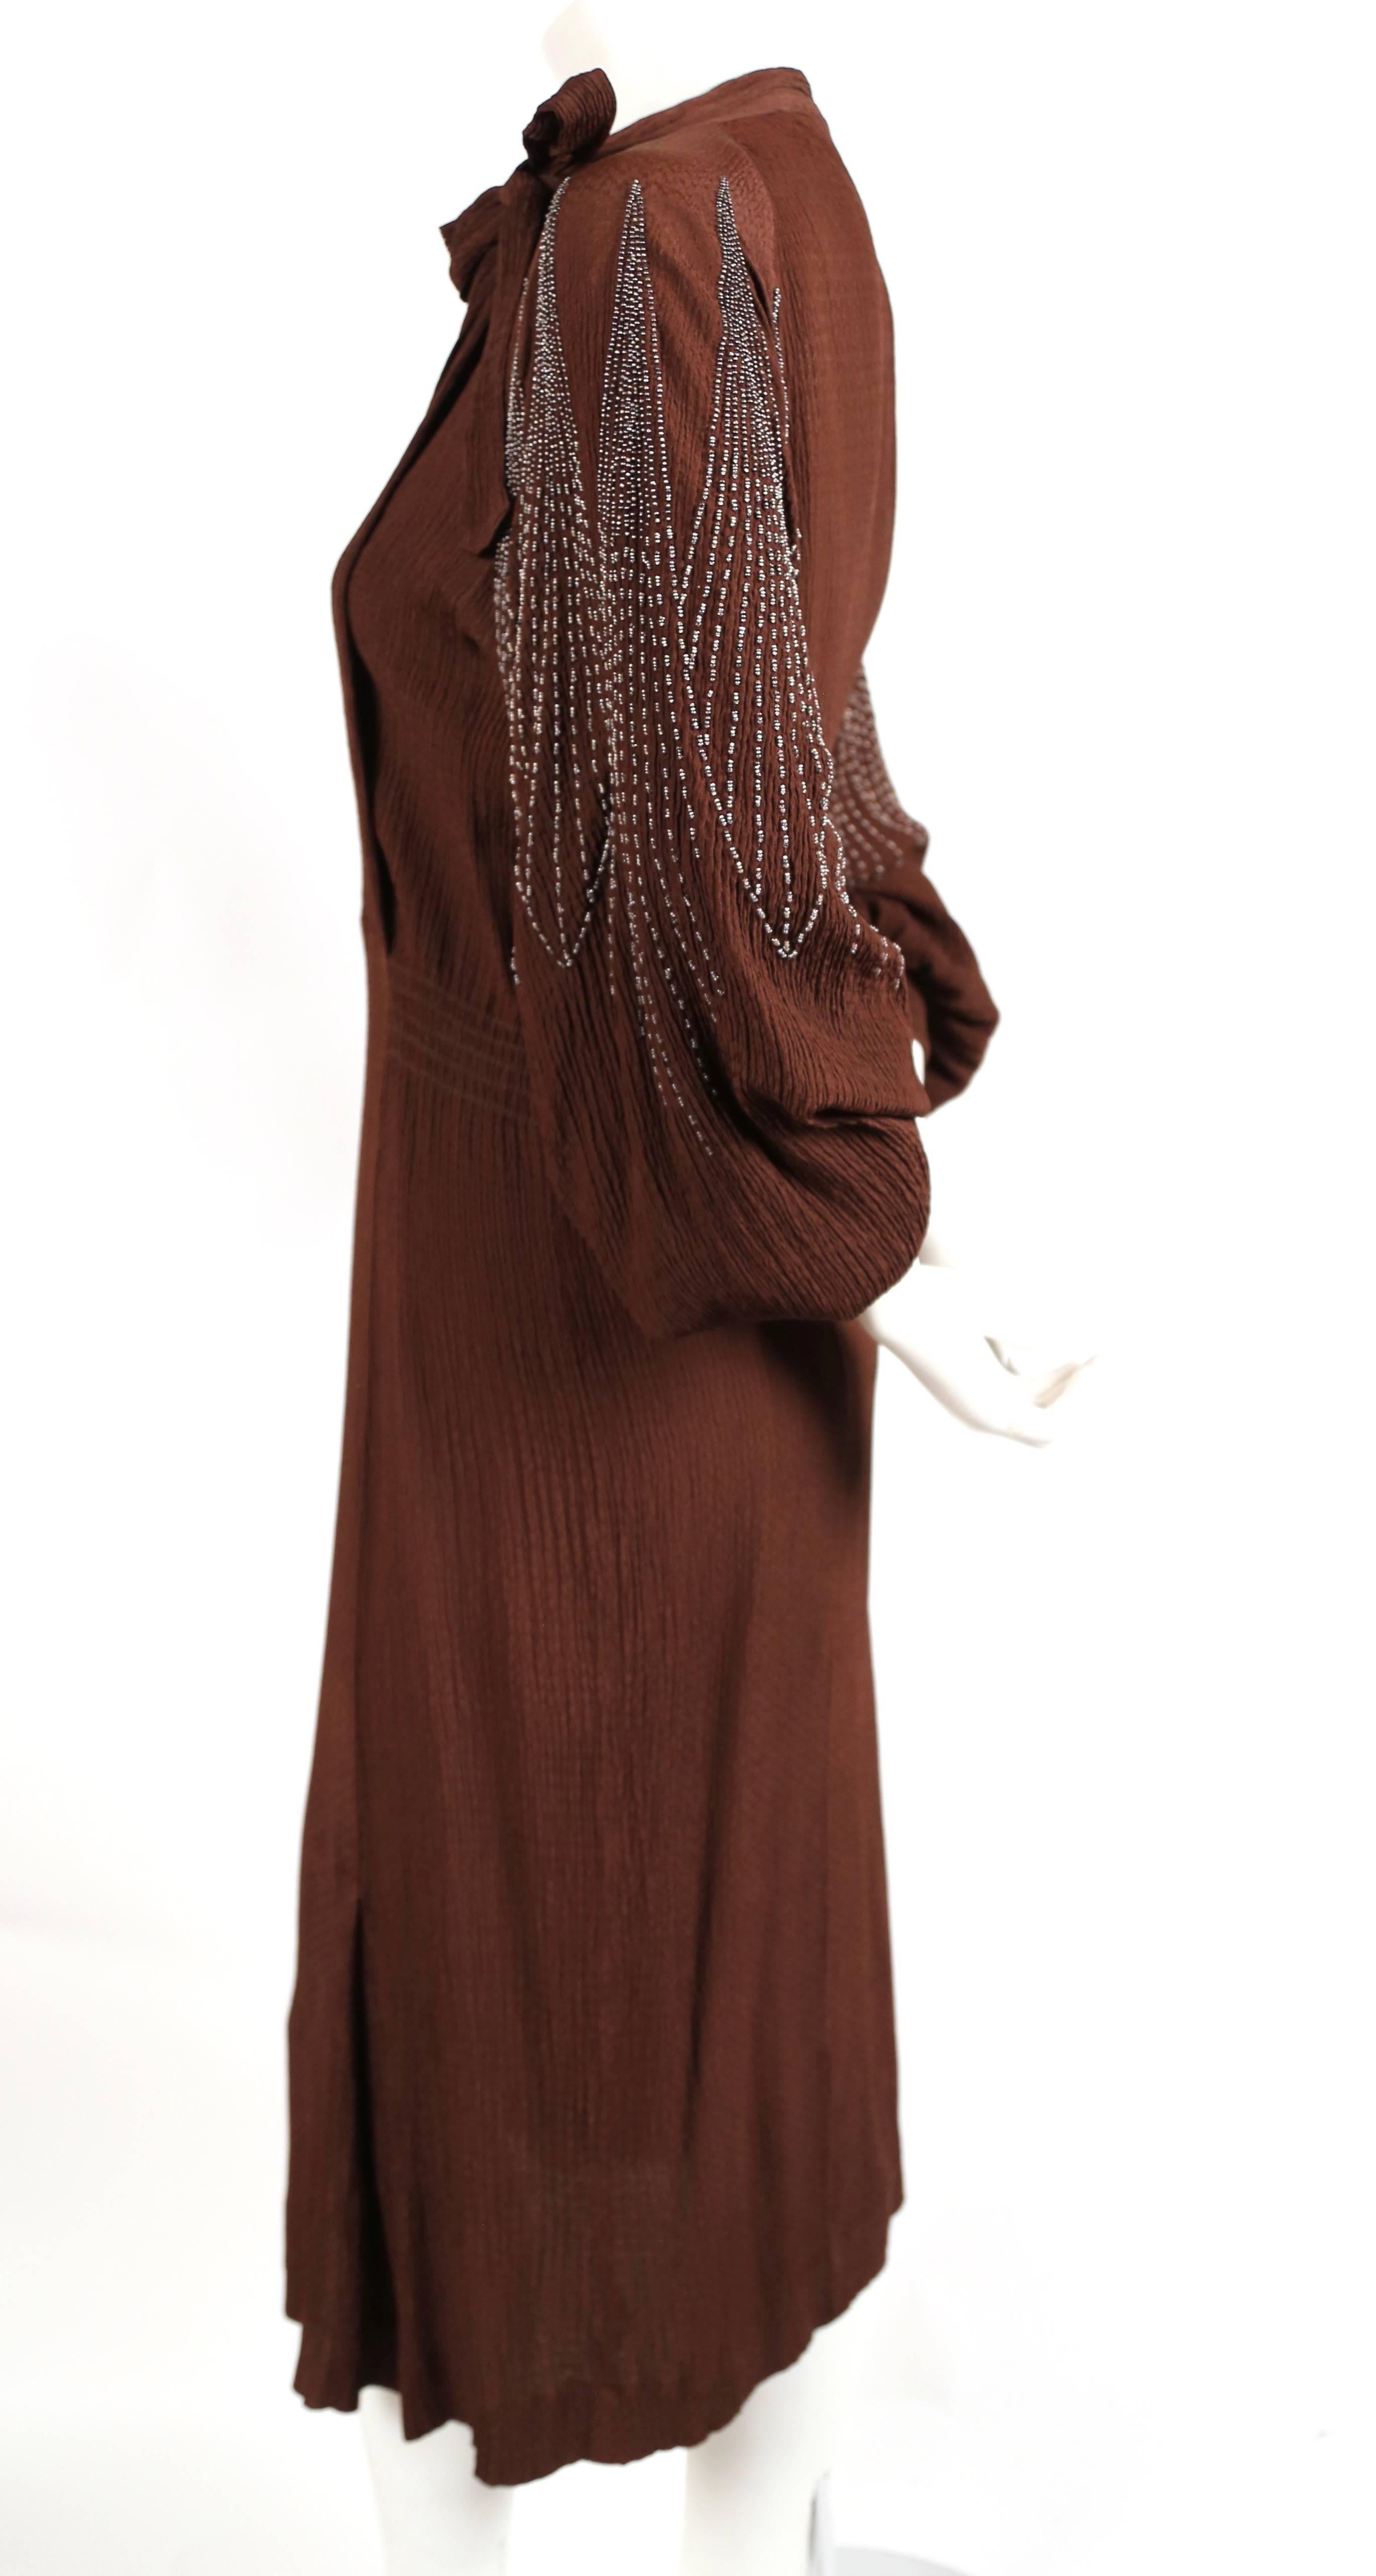 Rich brown crepe dress with heavily beaded sleeves from Mainbocher dating to the late 1930's. This is a very rare piece from the Parisian atelier before Mainbocher relocated to New York.  Dress best fits a US size 8-10. Dress measures approximately: